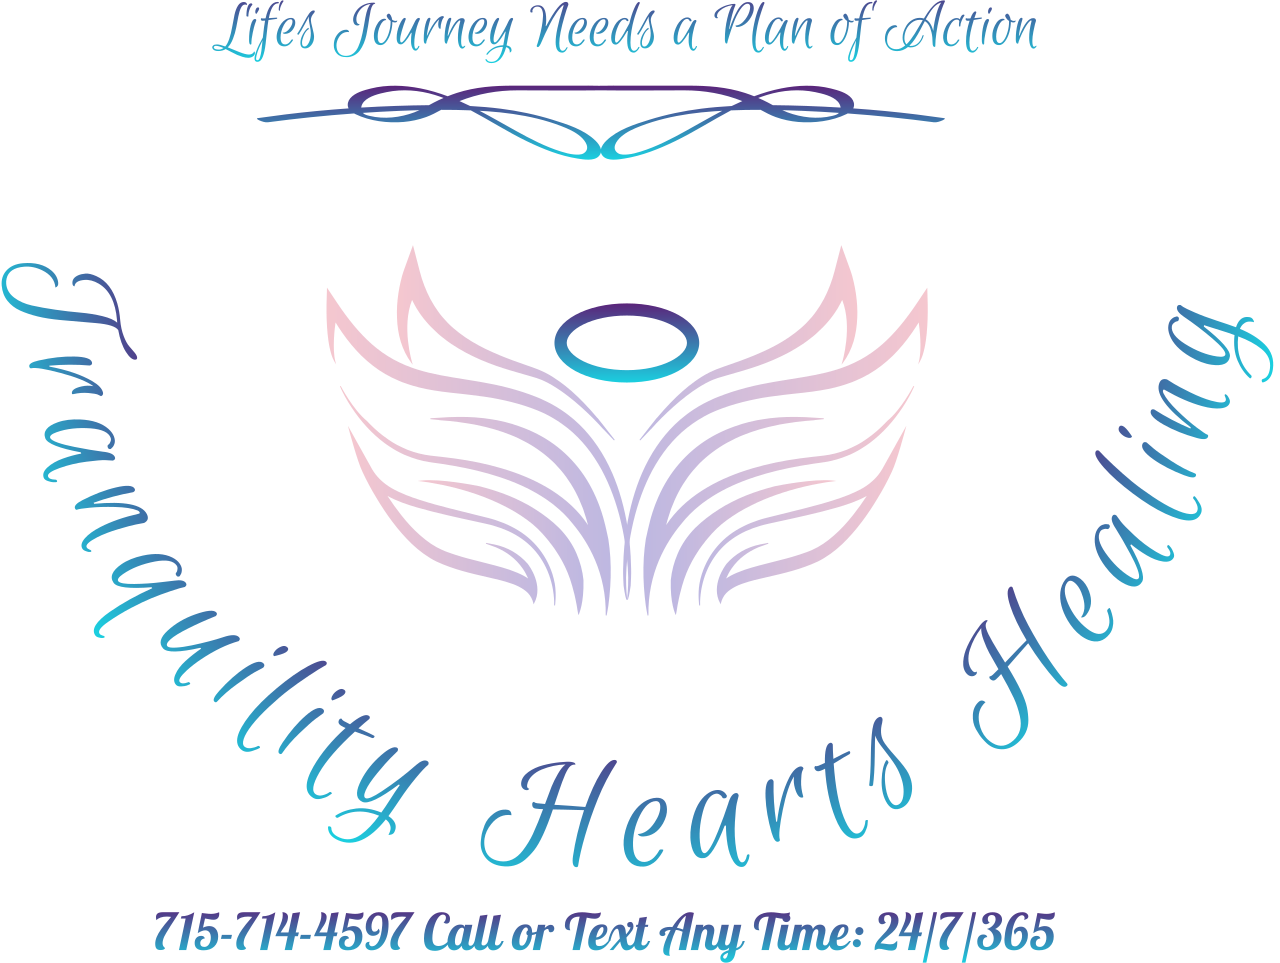 Tranquility Hearts Healing 's web page